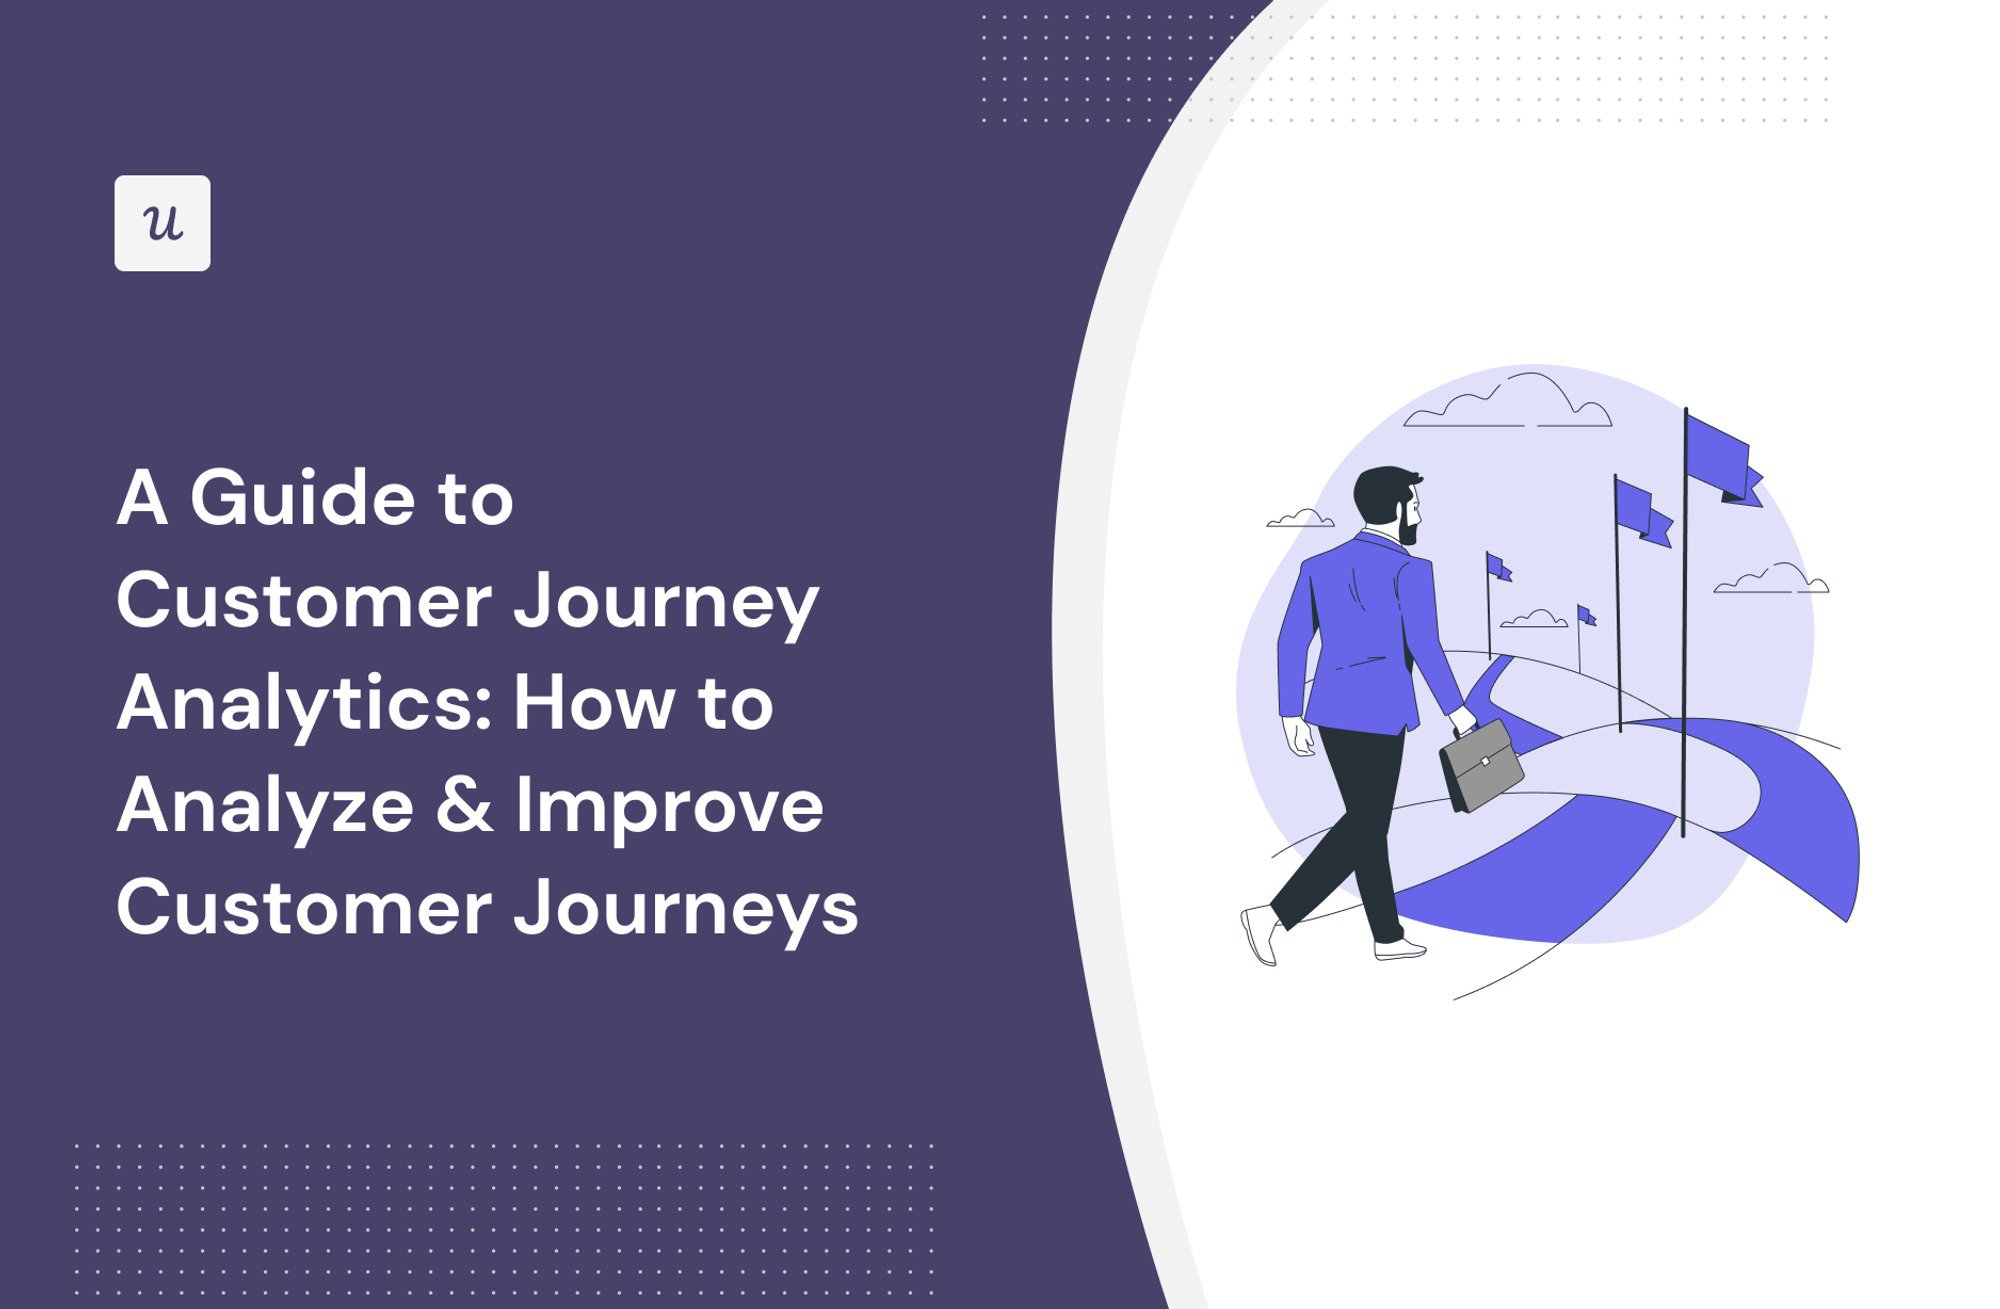 A Guide to Customer Journey Analytics: How to Analyze & Improve Customer Journeys cover